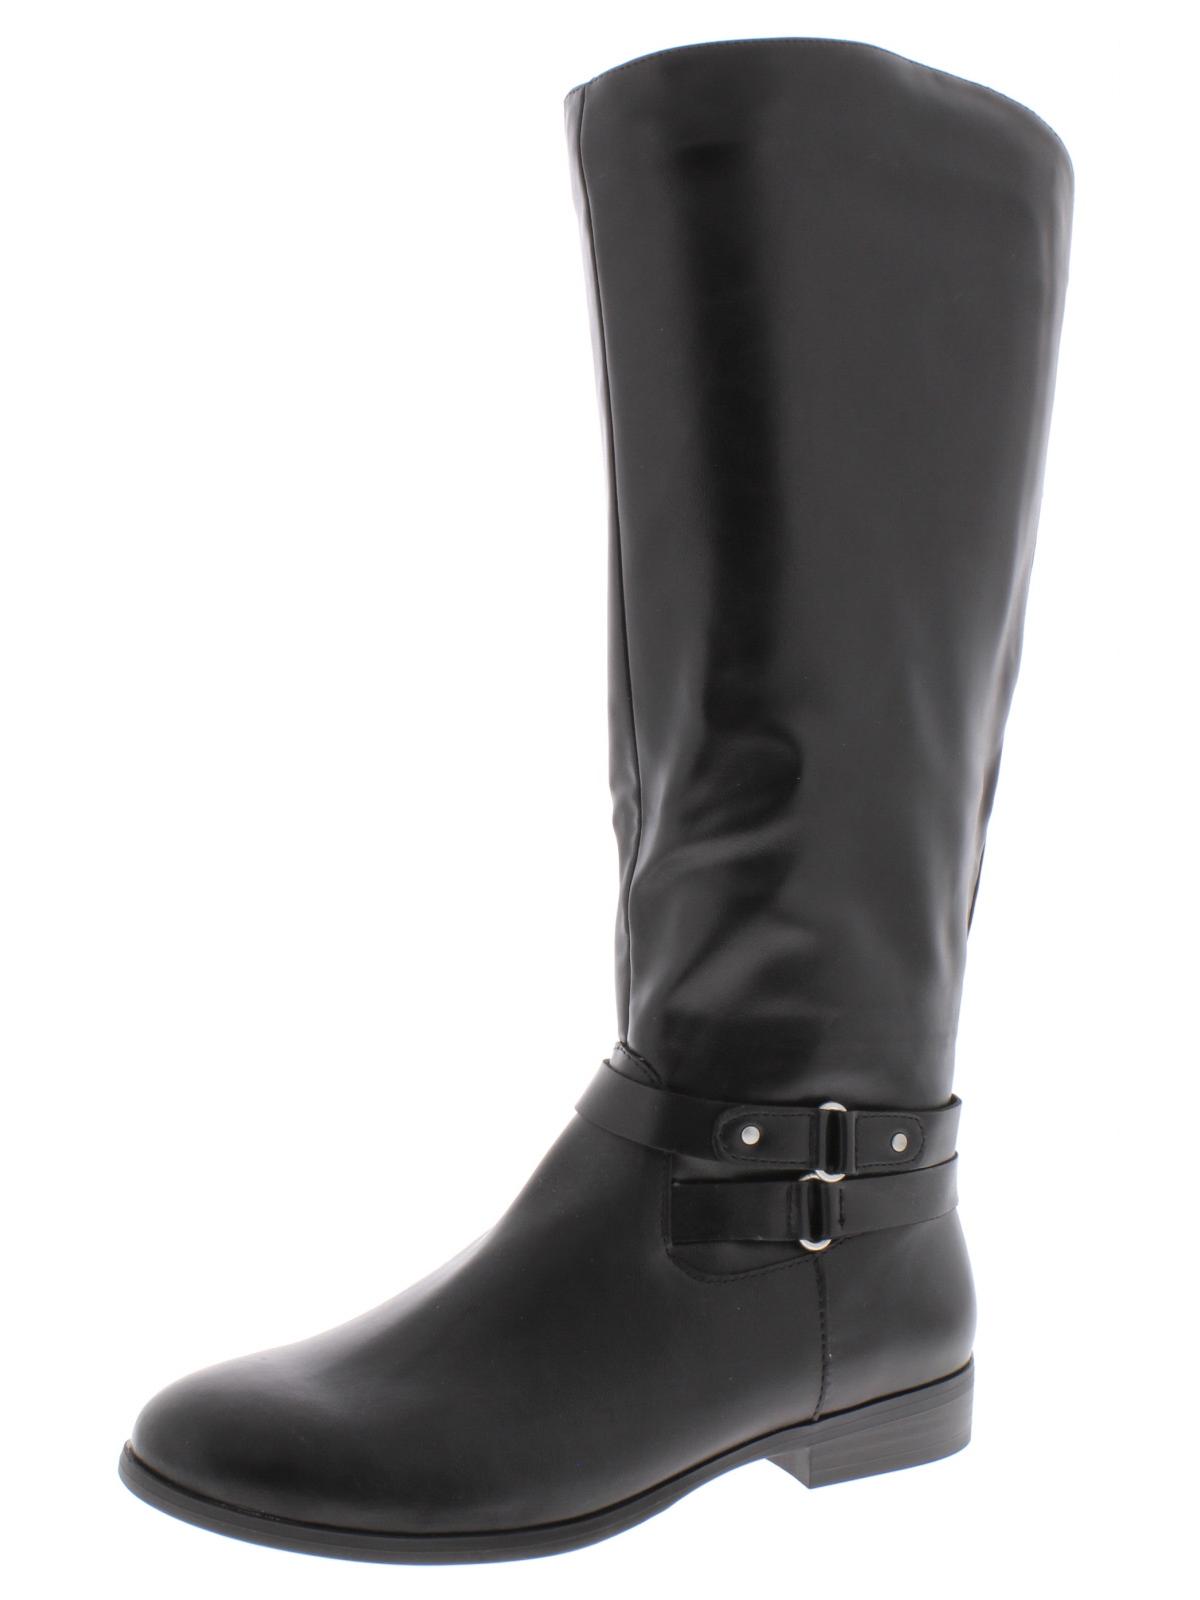 Style & Co Women's Kindell Faux Leather Riding Boots Black Size 6.5 M - image 1 of 2